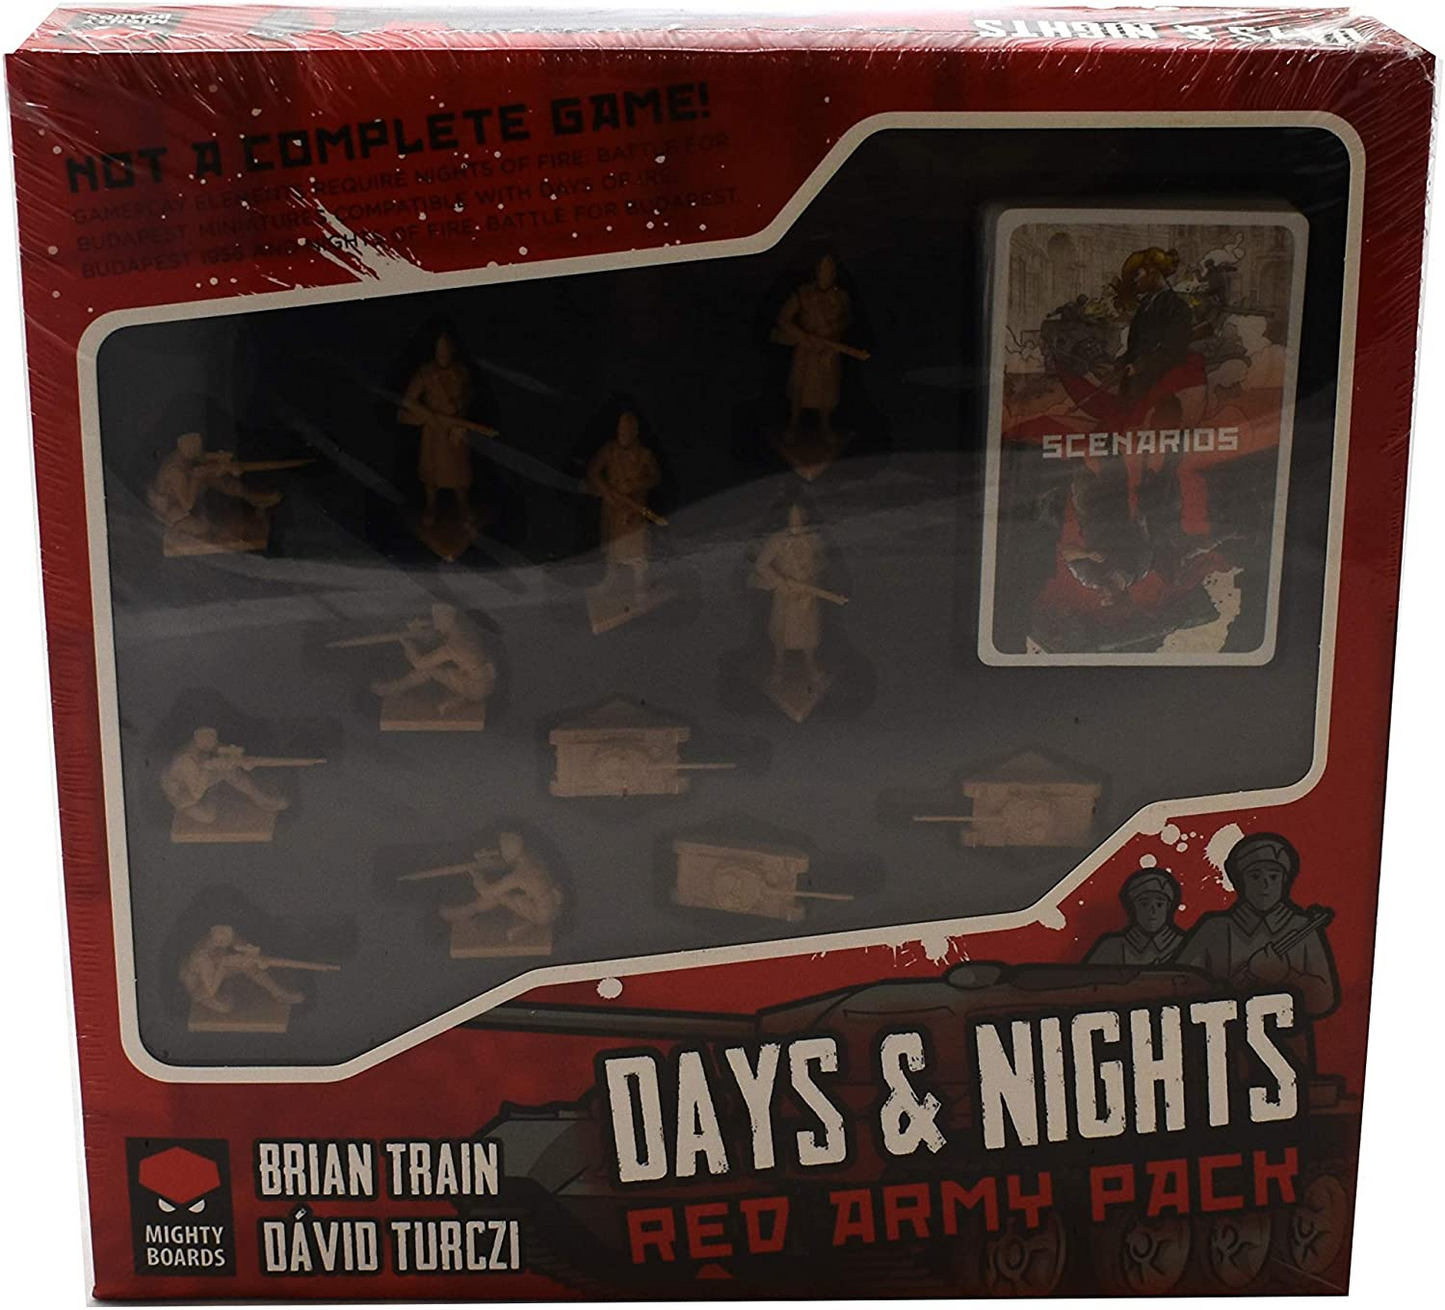 DAYS & NIGHTS RED ARMY PACK